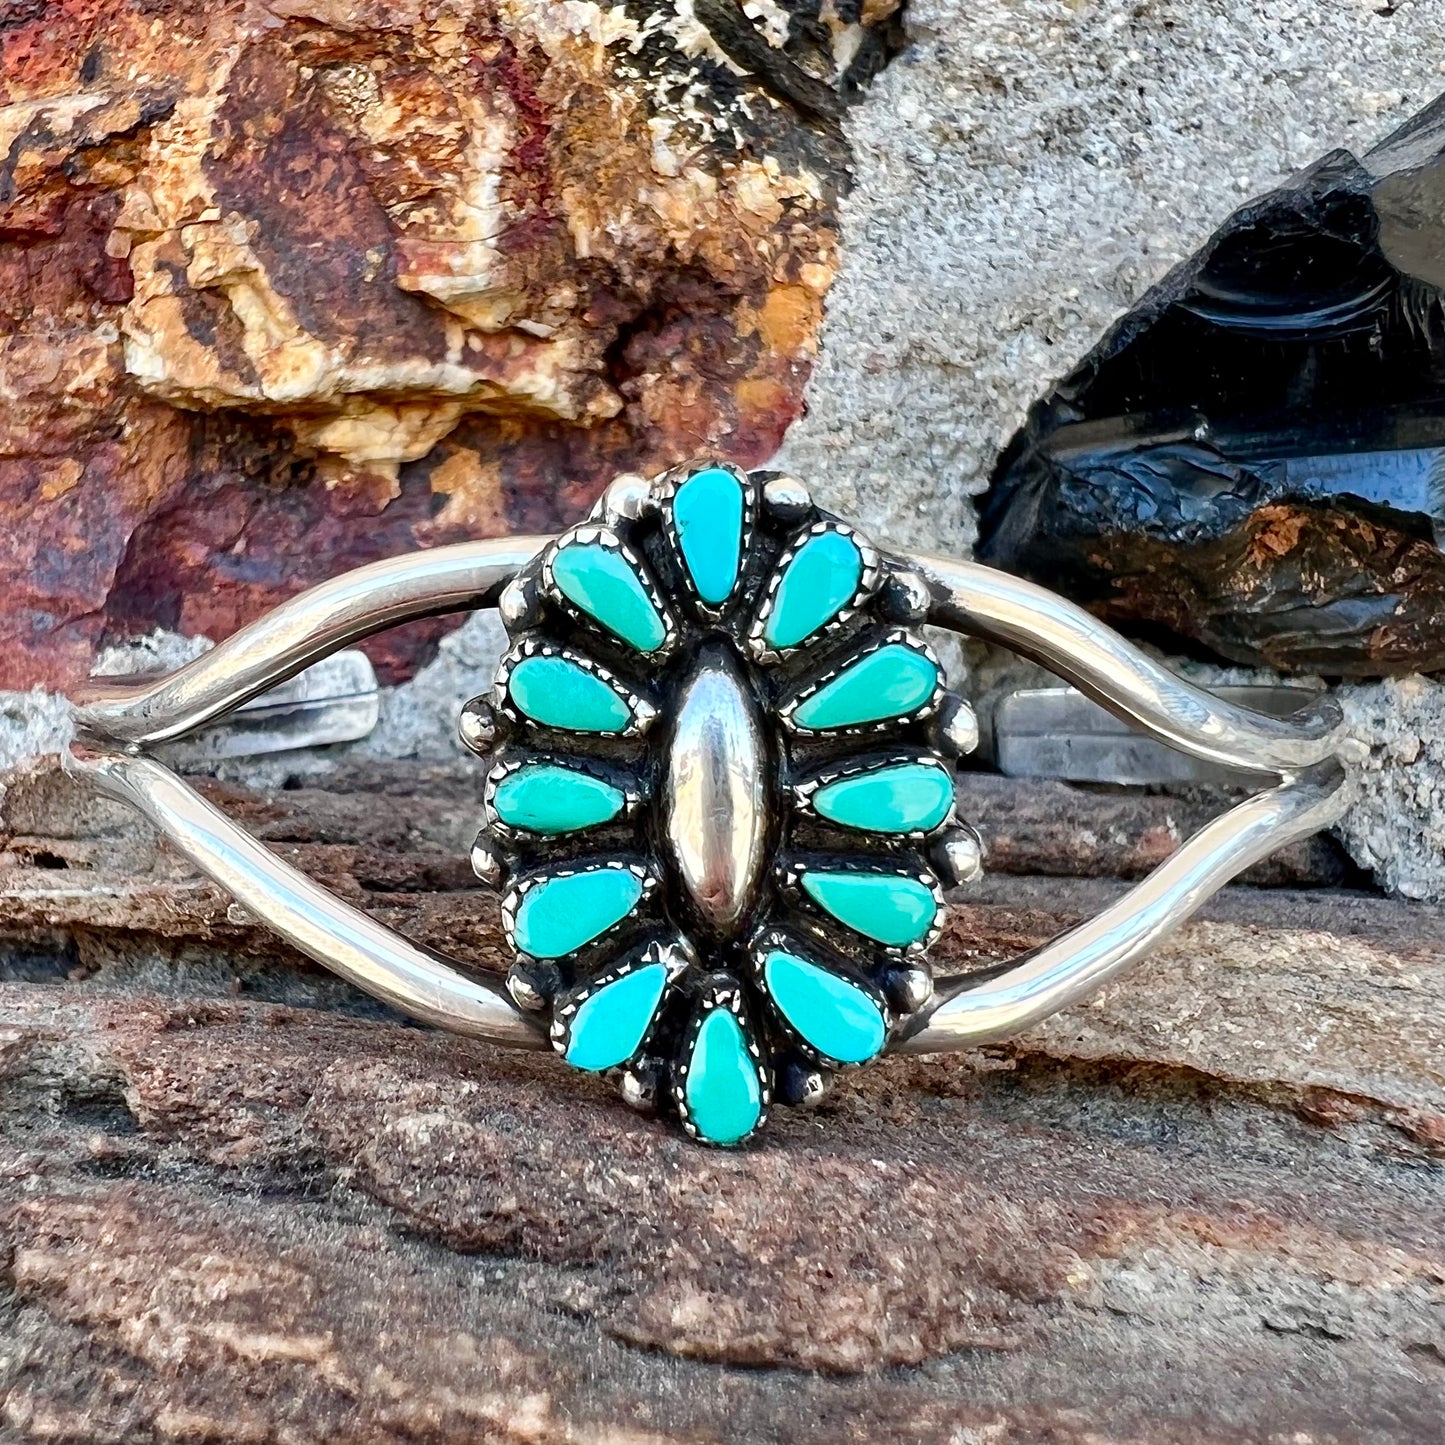 A Zuni style petit point silver turquoise cuff bracelet.  The piece was handmade and signed by Maryann and Felix Chavez.